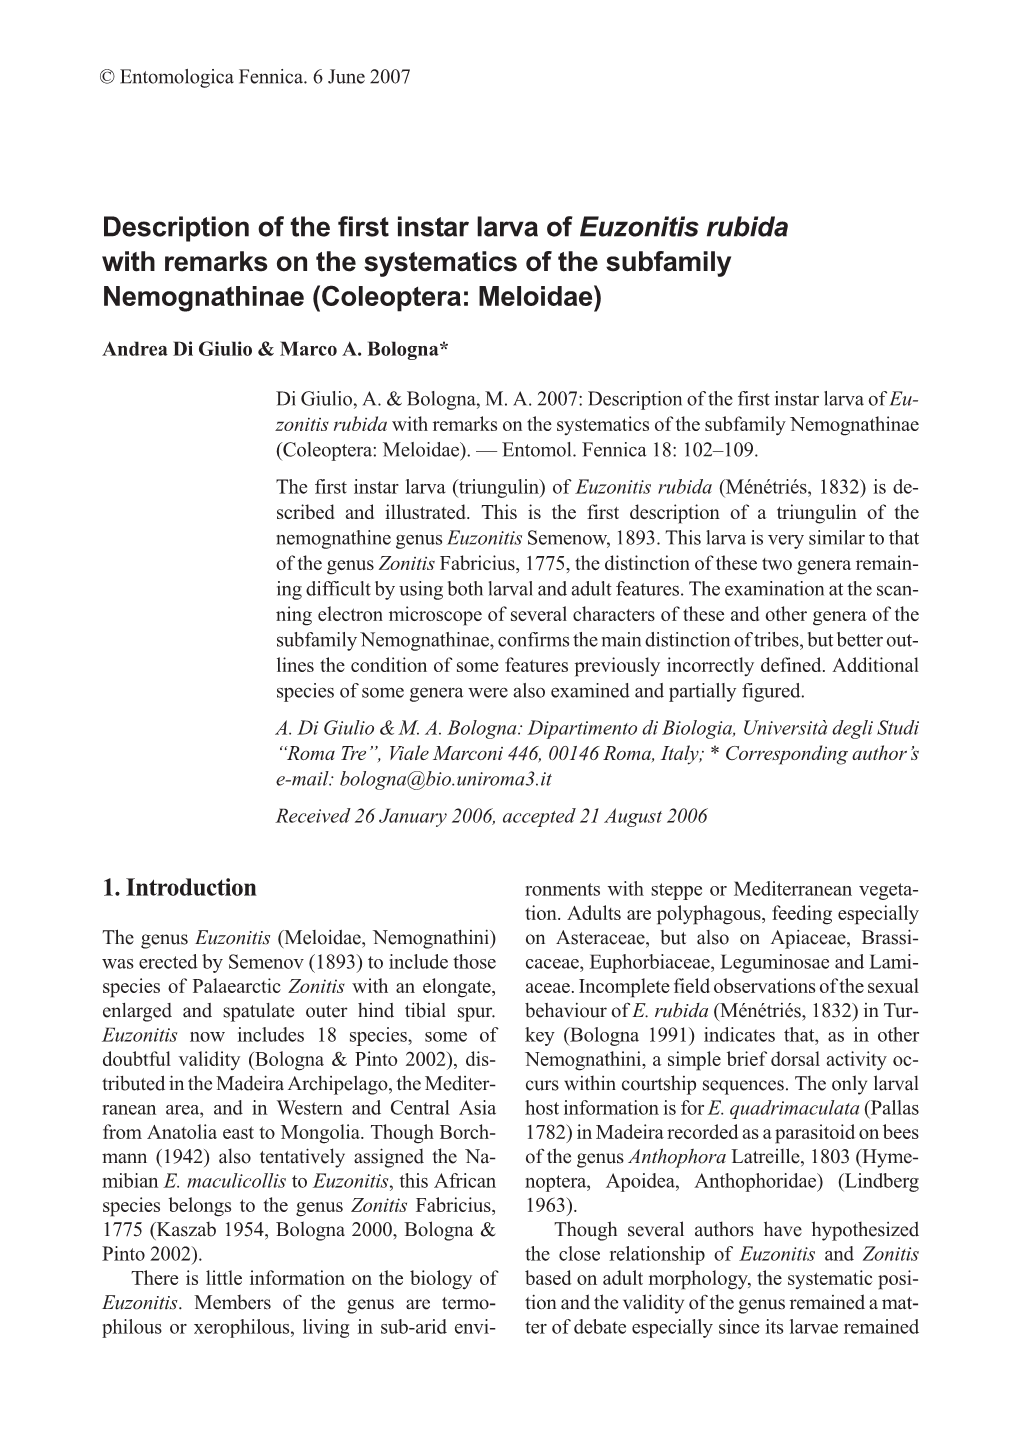 Description of the First Instar Larva of Euzonitis Rubida with Remarks on the Systematics of the Subfamily Nemognathinae (Coleoptera: Meloidae)